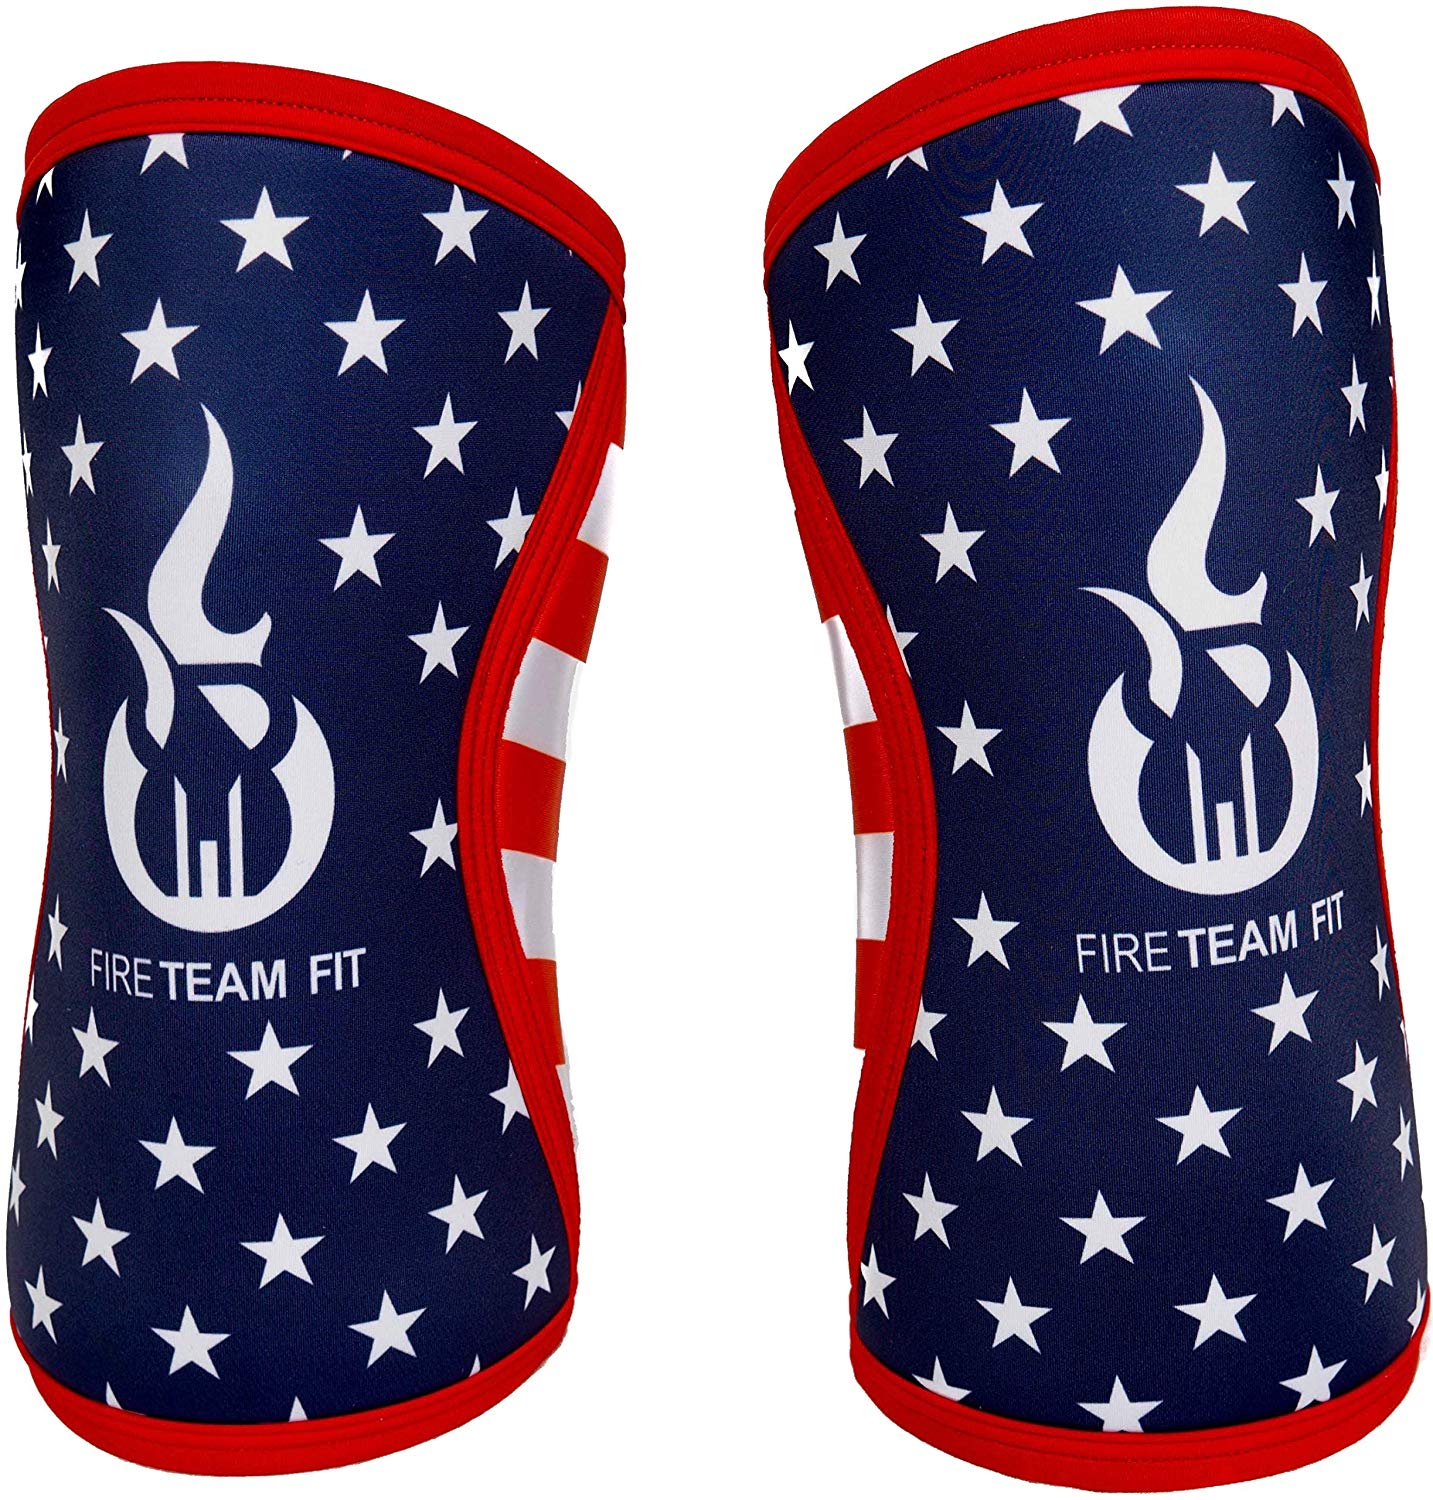 Fire Team Fit Knee Sleeve 7mm, Compression Support Weight Lifting Cross Training